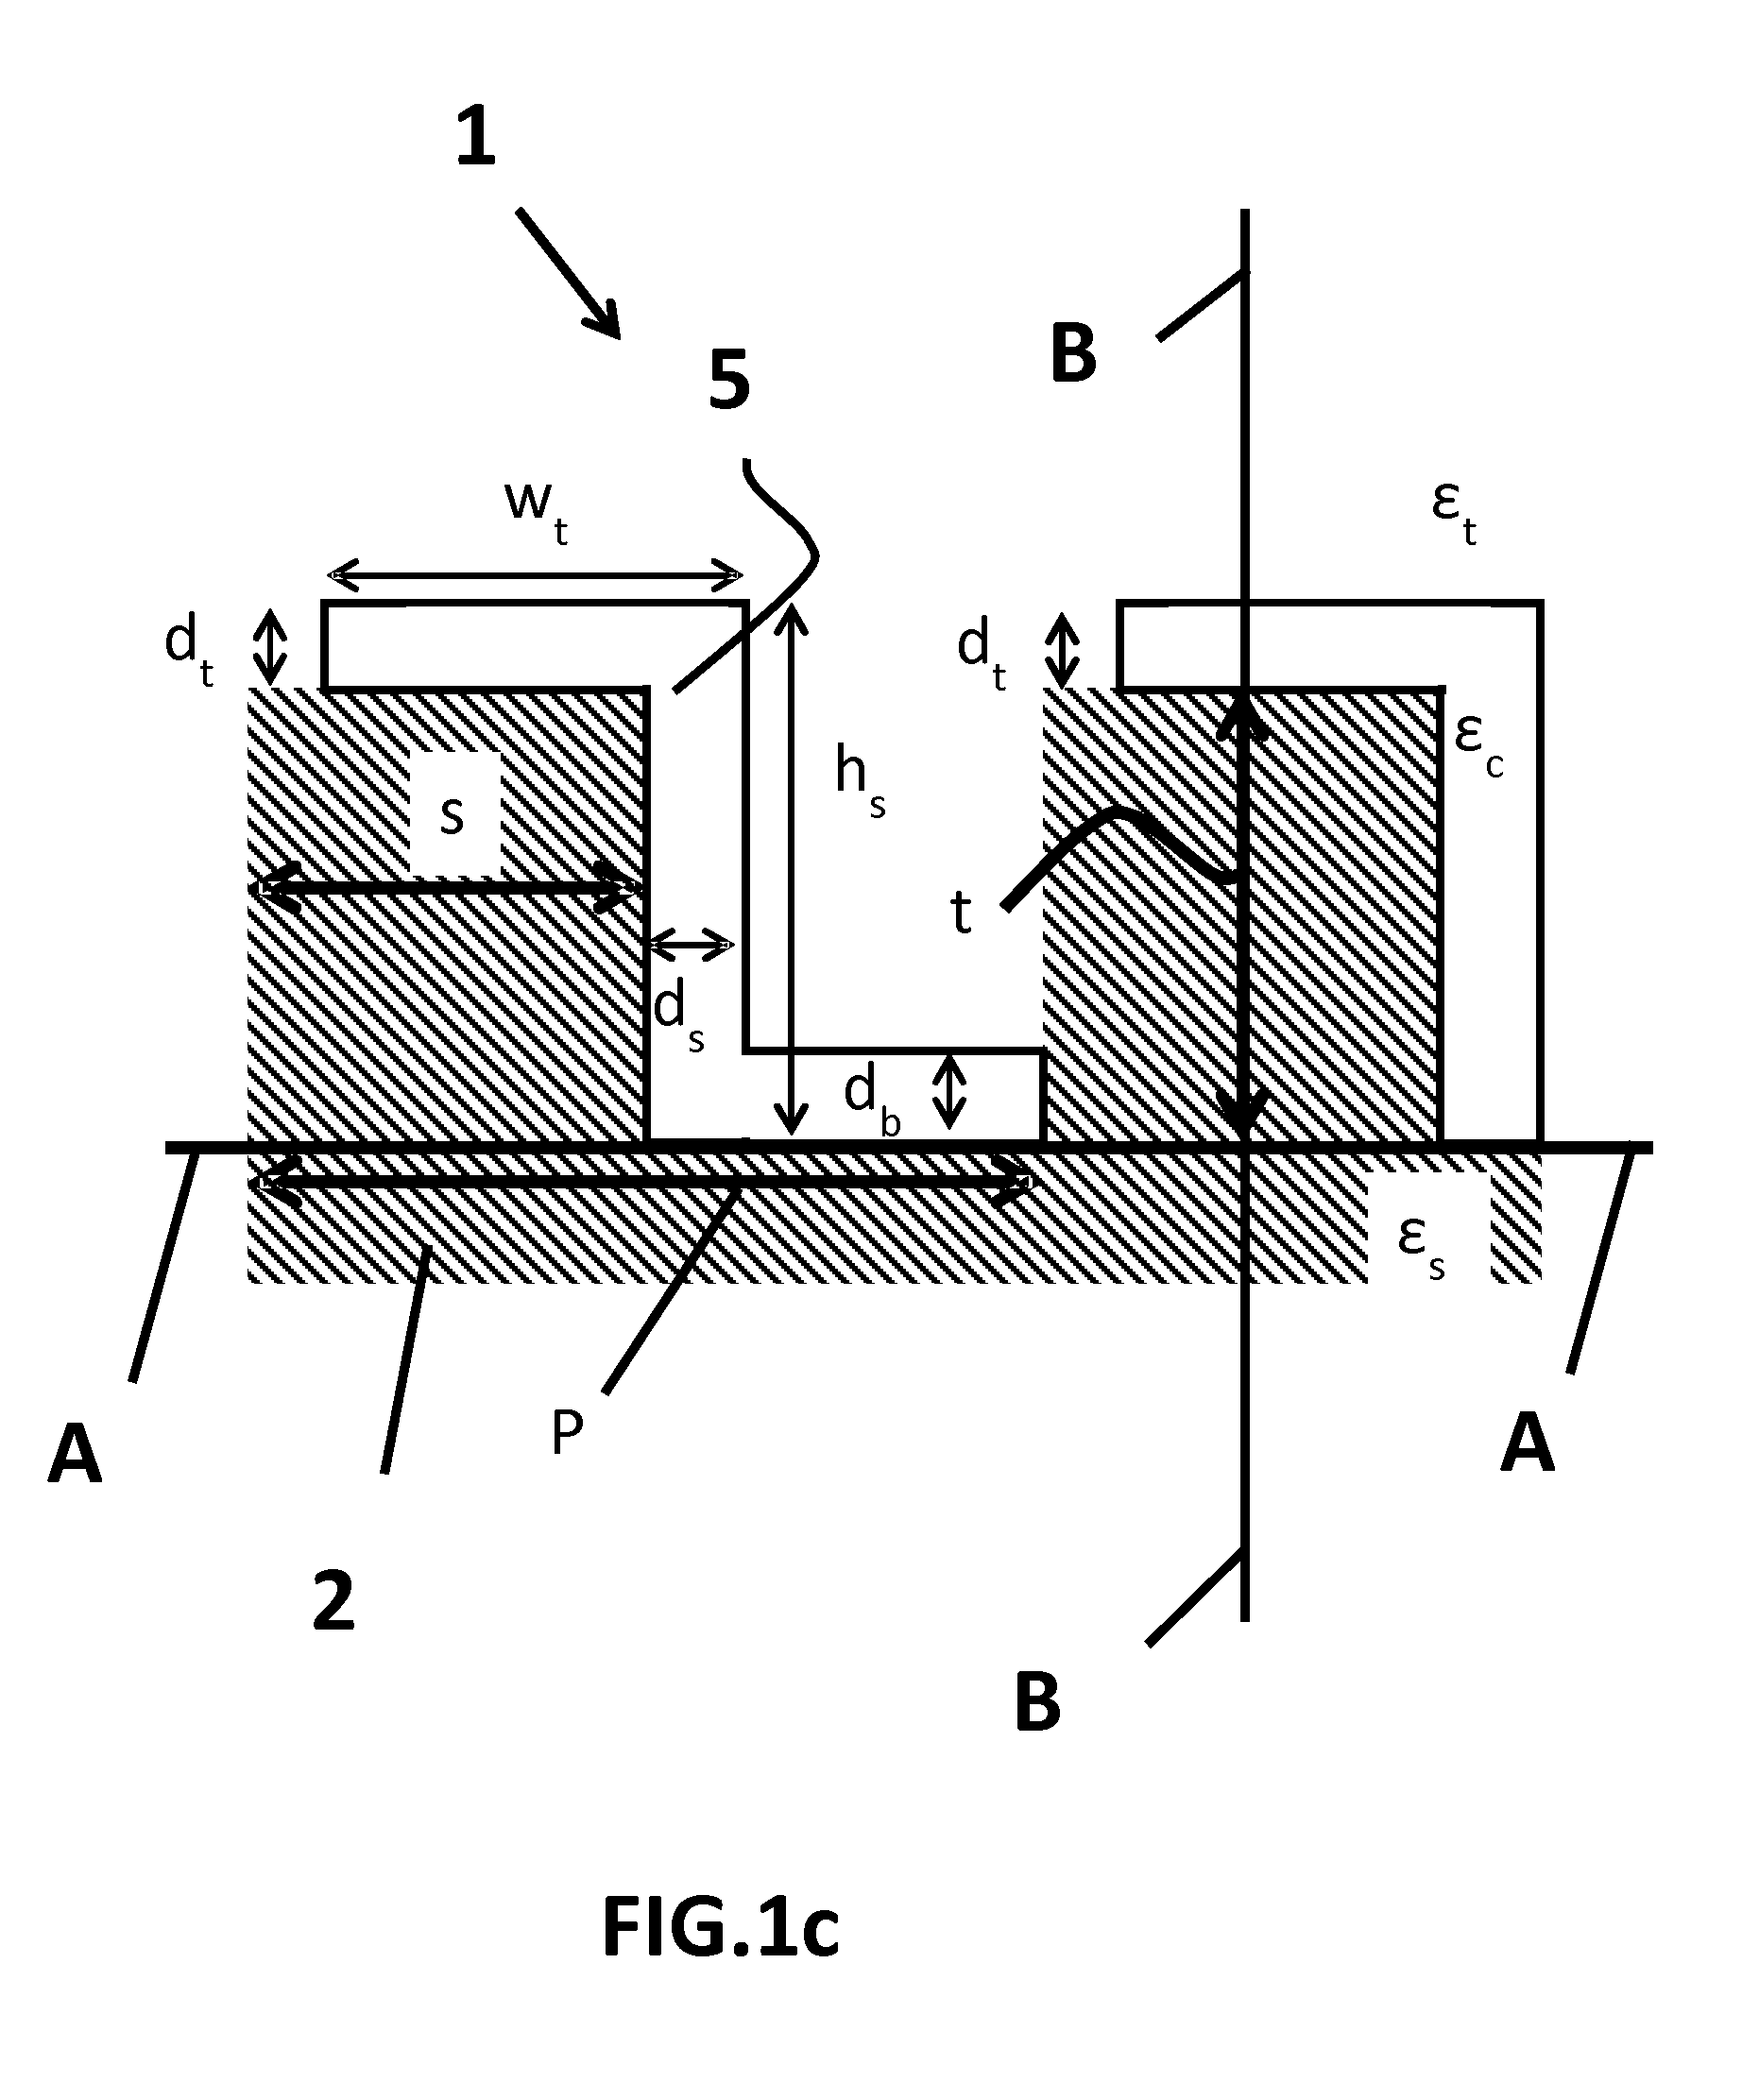 Optical grating coupling structure